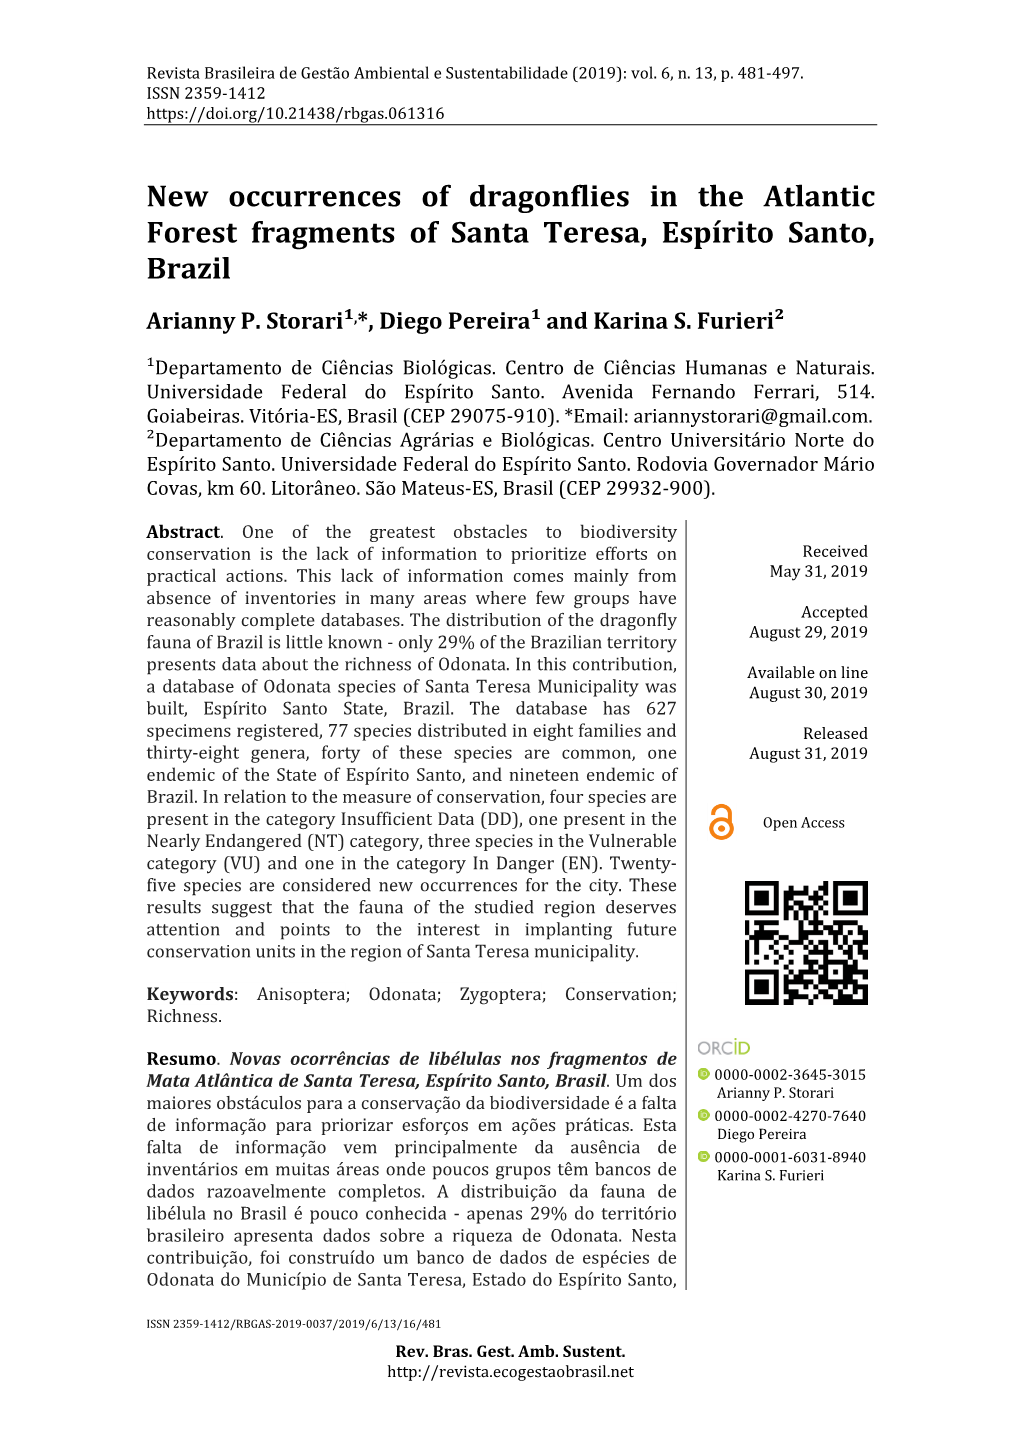 New Occurrences of Dragonflies in the Atlantic Forest Fragments of Santa Teresa, Espírito Santo, Brazil